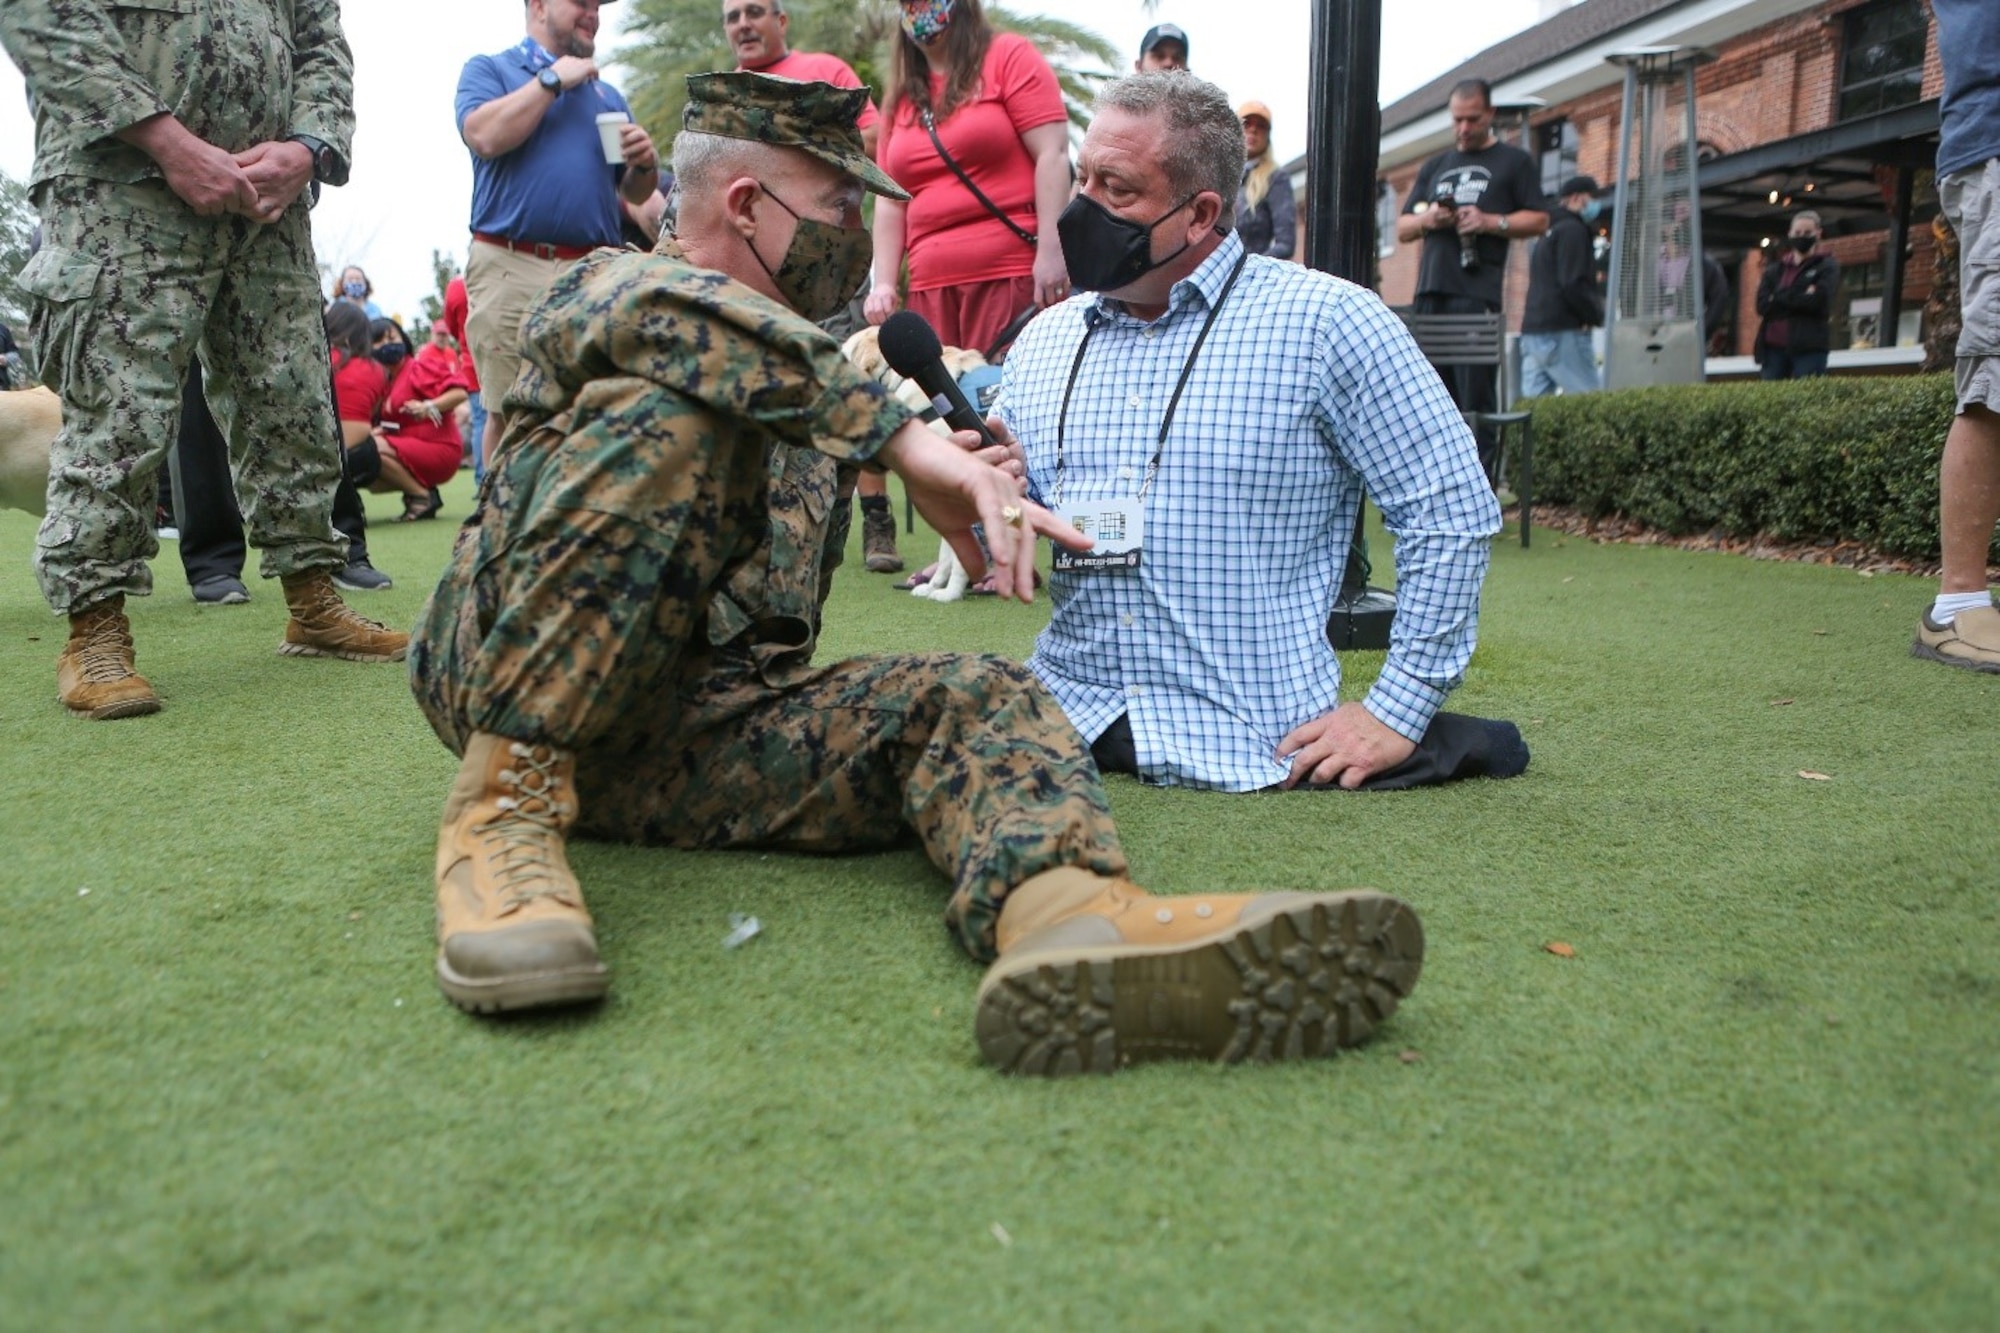 U.S. Marine Corps General Kenneth F. McKenzie Jr., the commander of U.S. Central Command, is interviewed by Dave Stevens of The Disability during the ‘Salute-To-Service-Stroll’ Feb. 6, 2021, at the Tampa Riverwalk, Tampa, Florida. “I am actually the one who is in the presence of heroes this morning,” said McKenzie of the veterans who had gathered for the event. (U.S. Army photo by Spc. Robert Vicens)